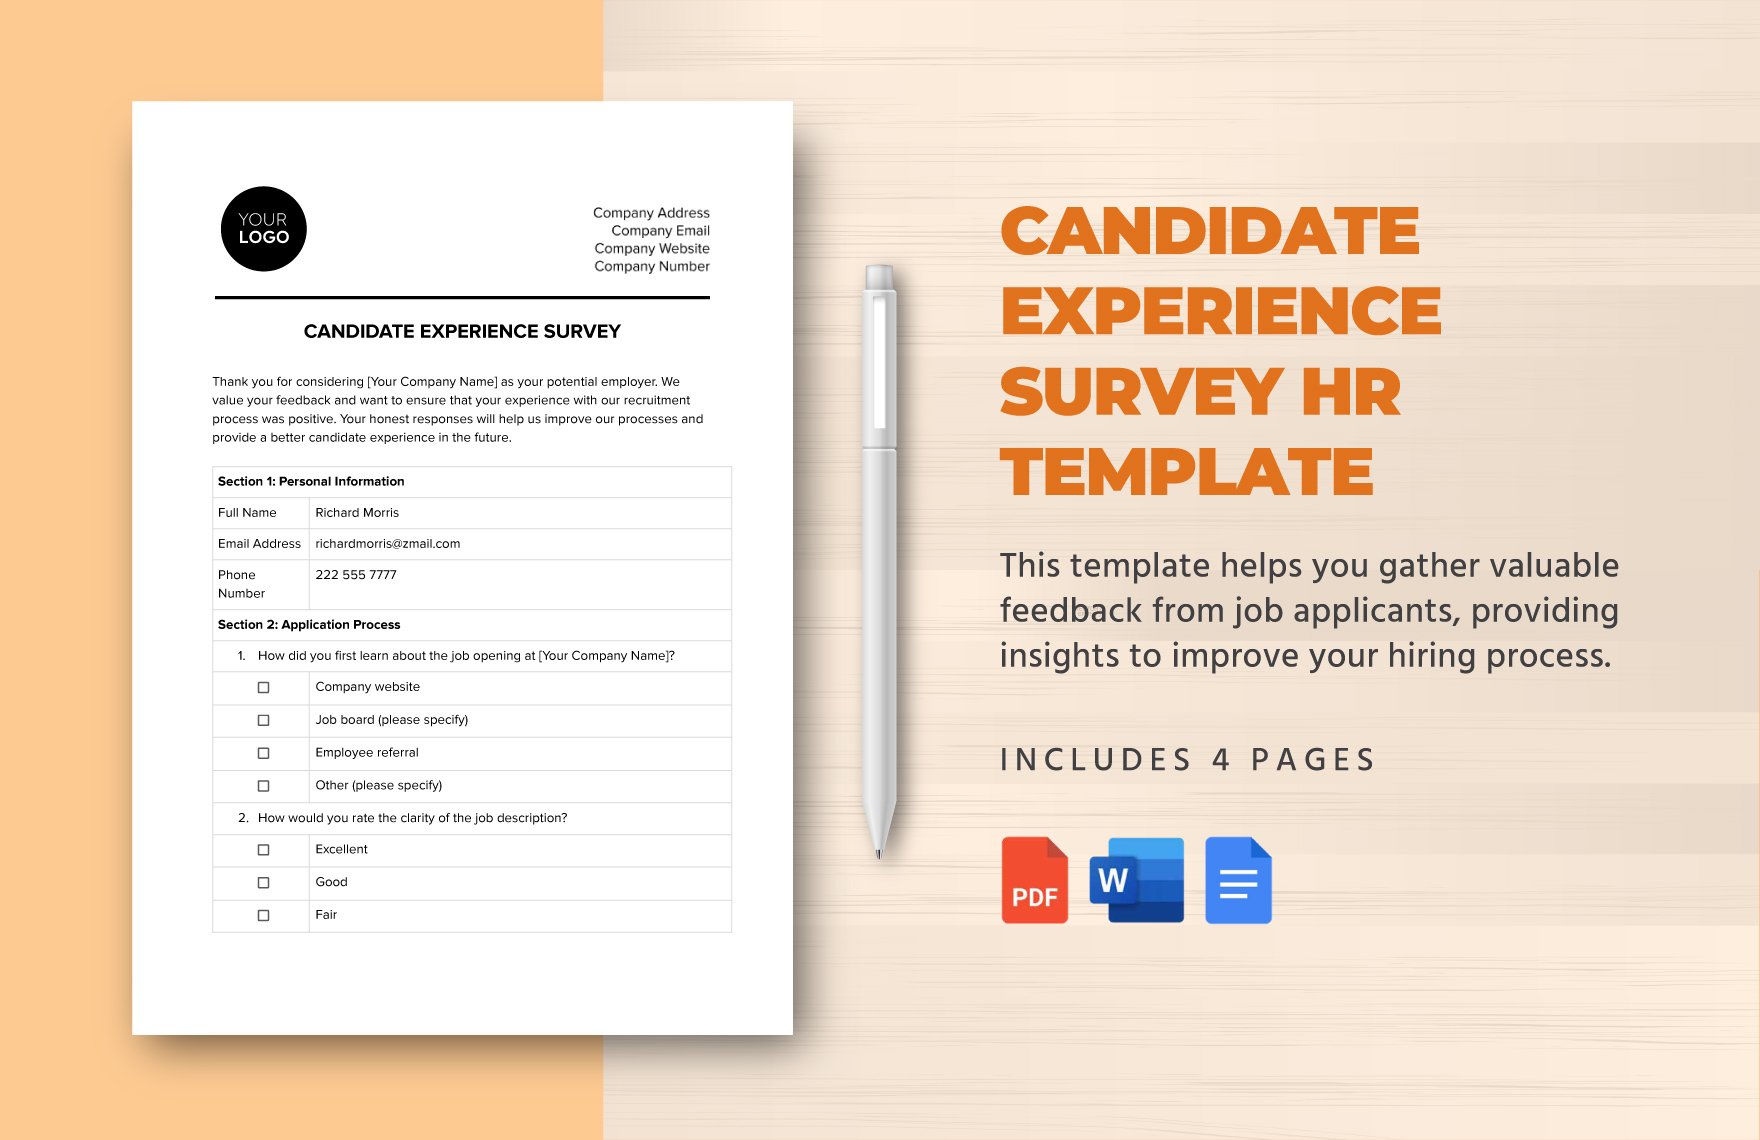 Candidate Experience Survey HR Template